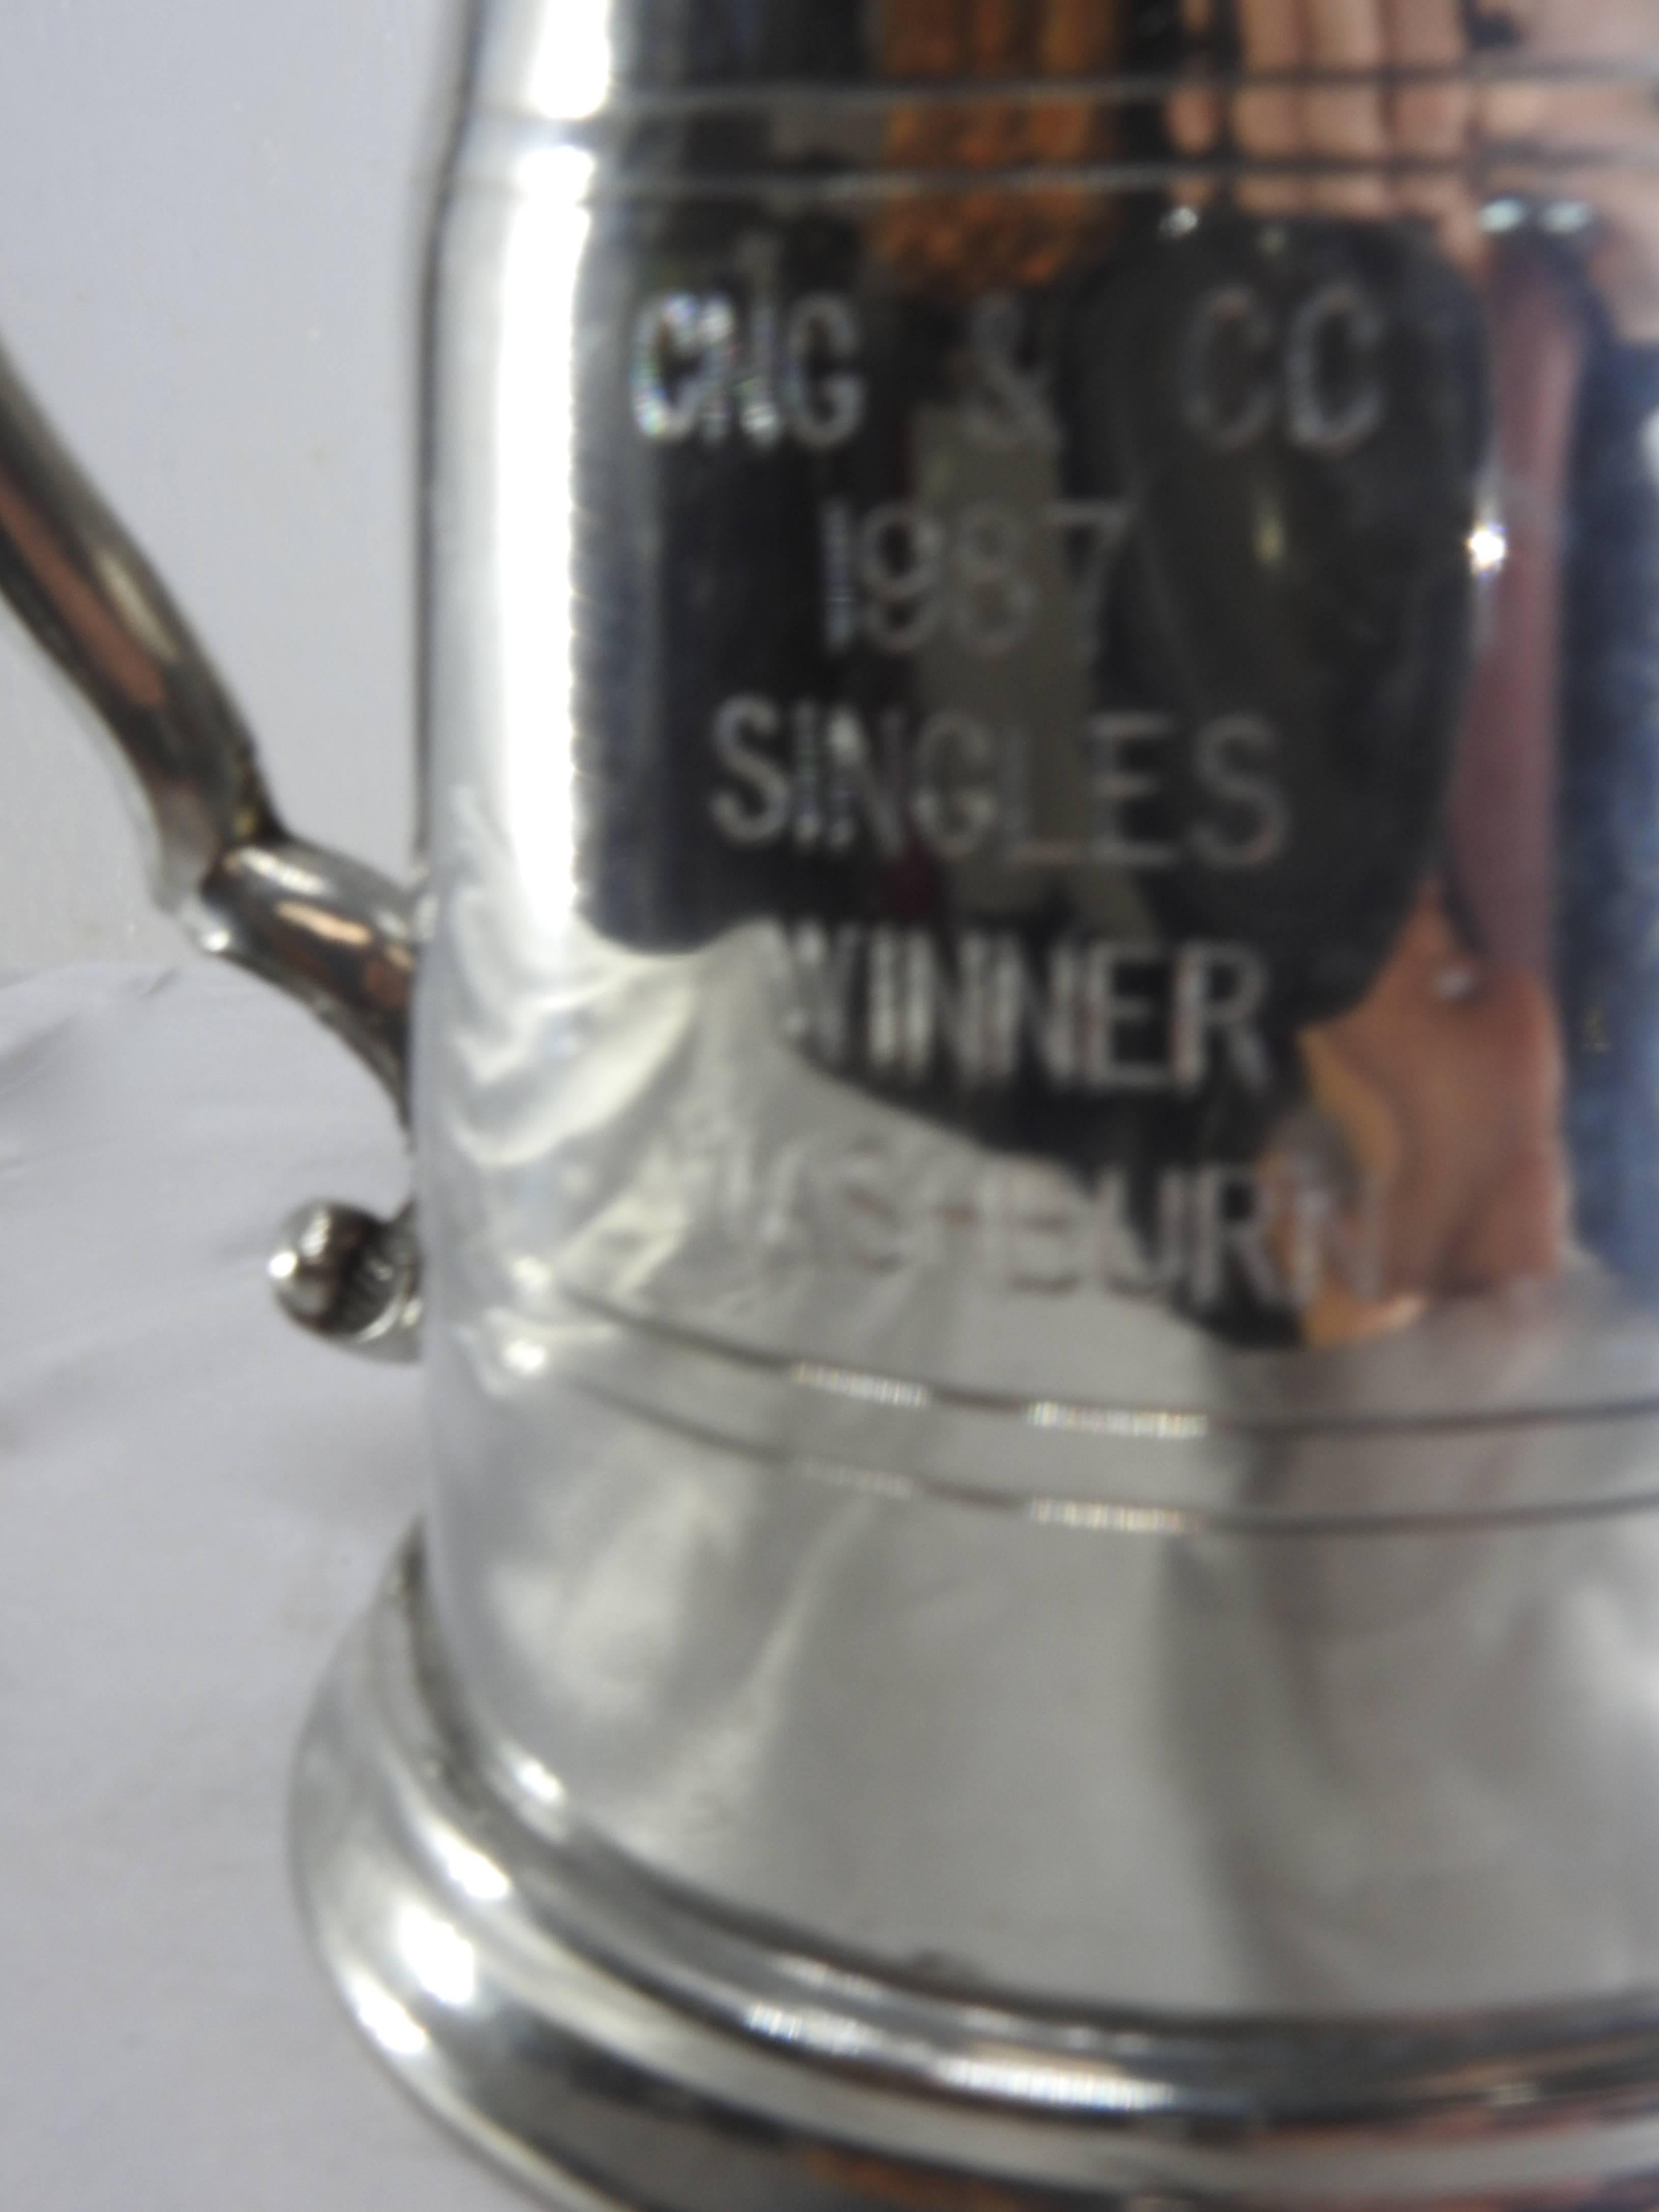 This Sheffield tankard is accented by a scrolling handle on the side. The tankard itself has curvy lines to add to its beauty. It in engraved CNG & Co., 1987, Singles Winner, Washburn. Pewter forms the tankard and the bottom has clear glass. The